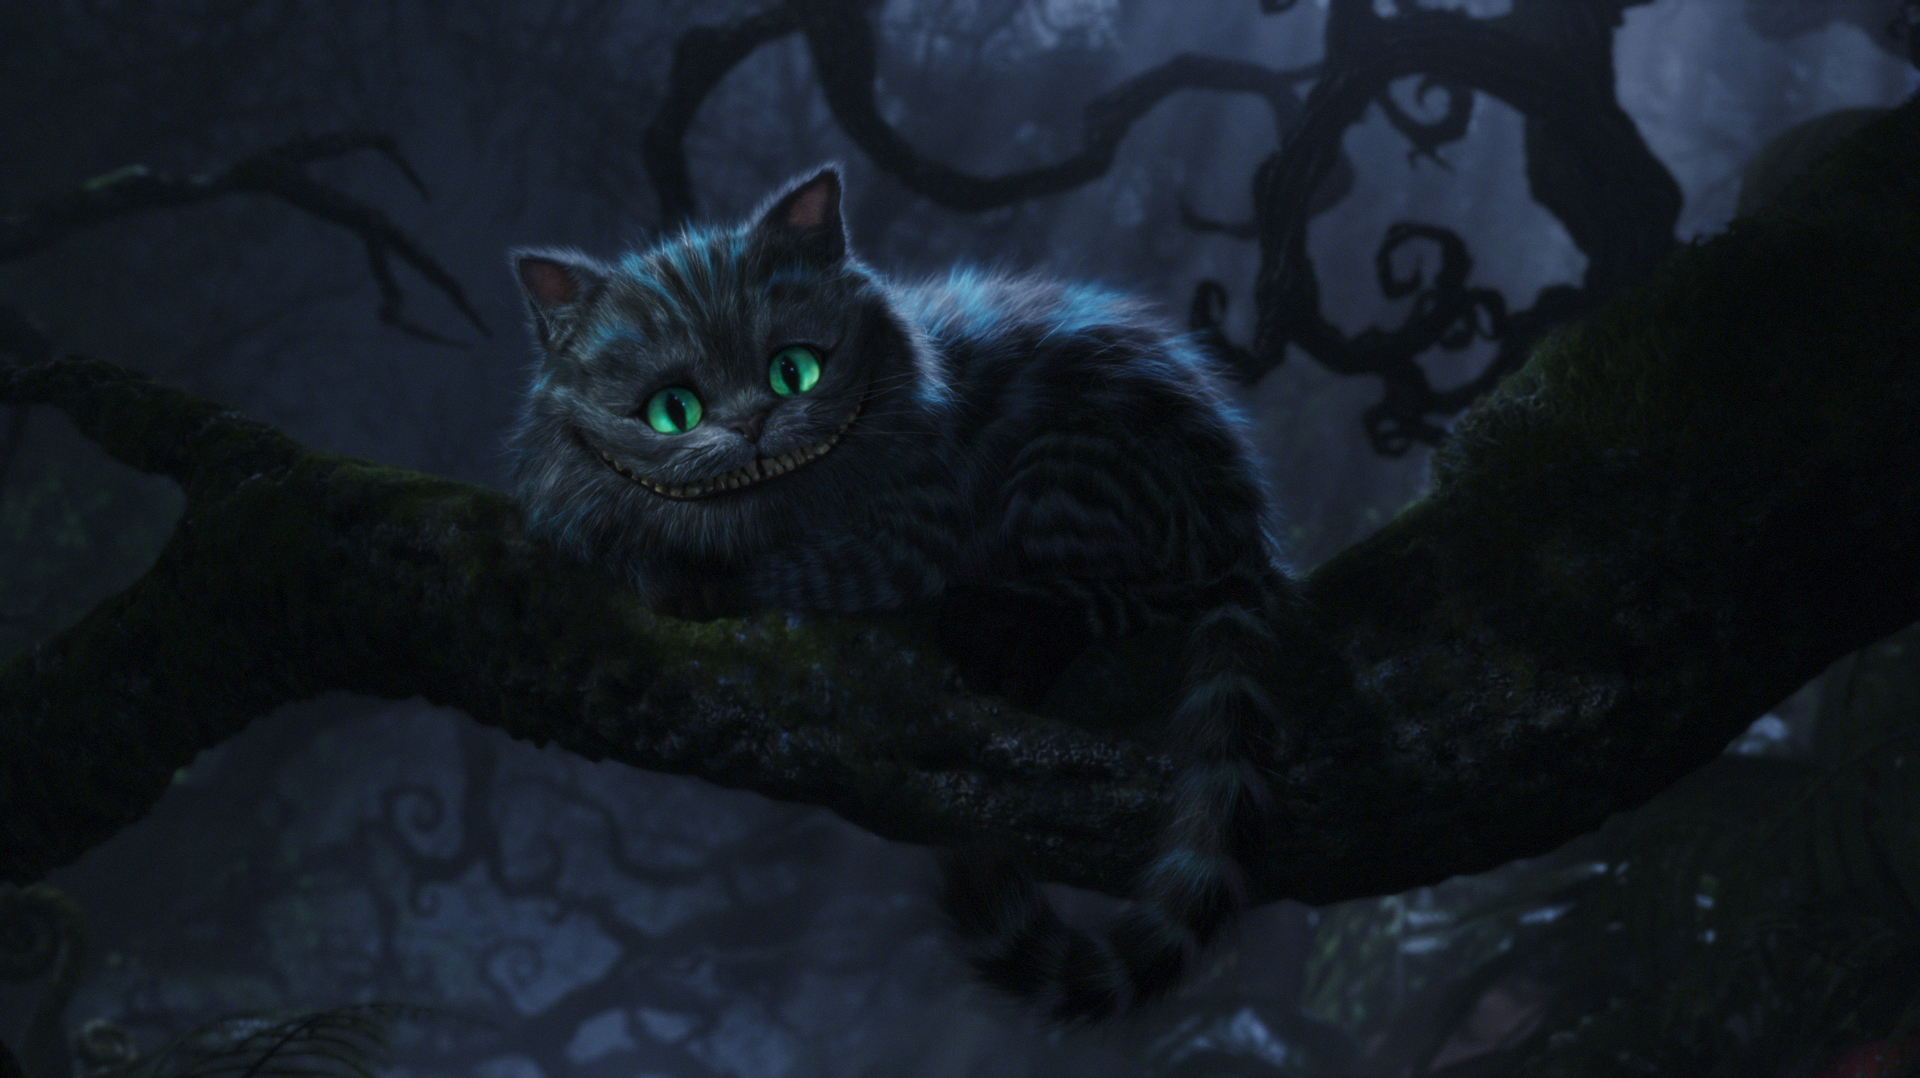 Exclusive: Four-Phase Progression Of The Cheshire Cat From Alice ... تعطيني